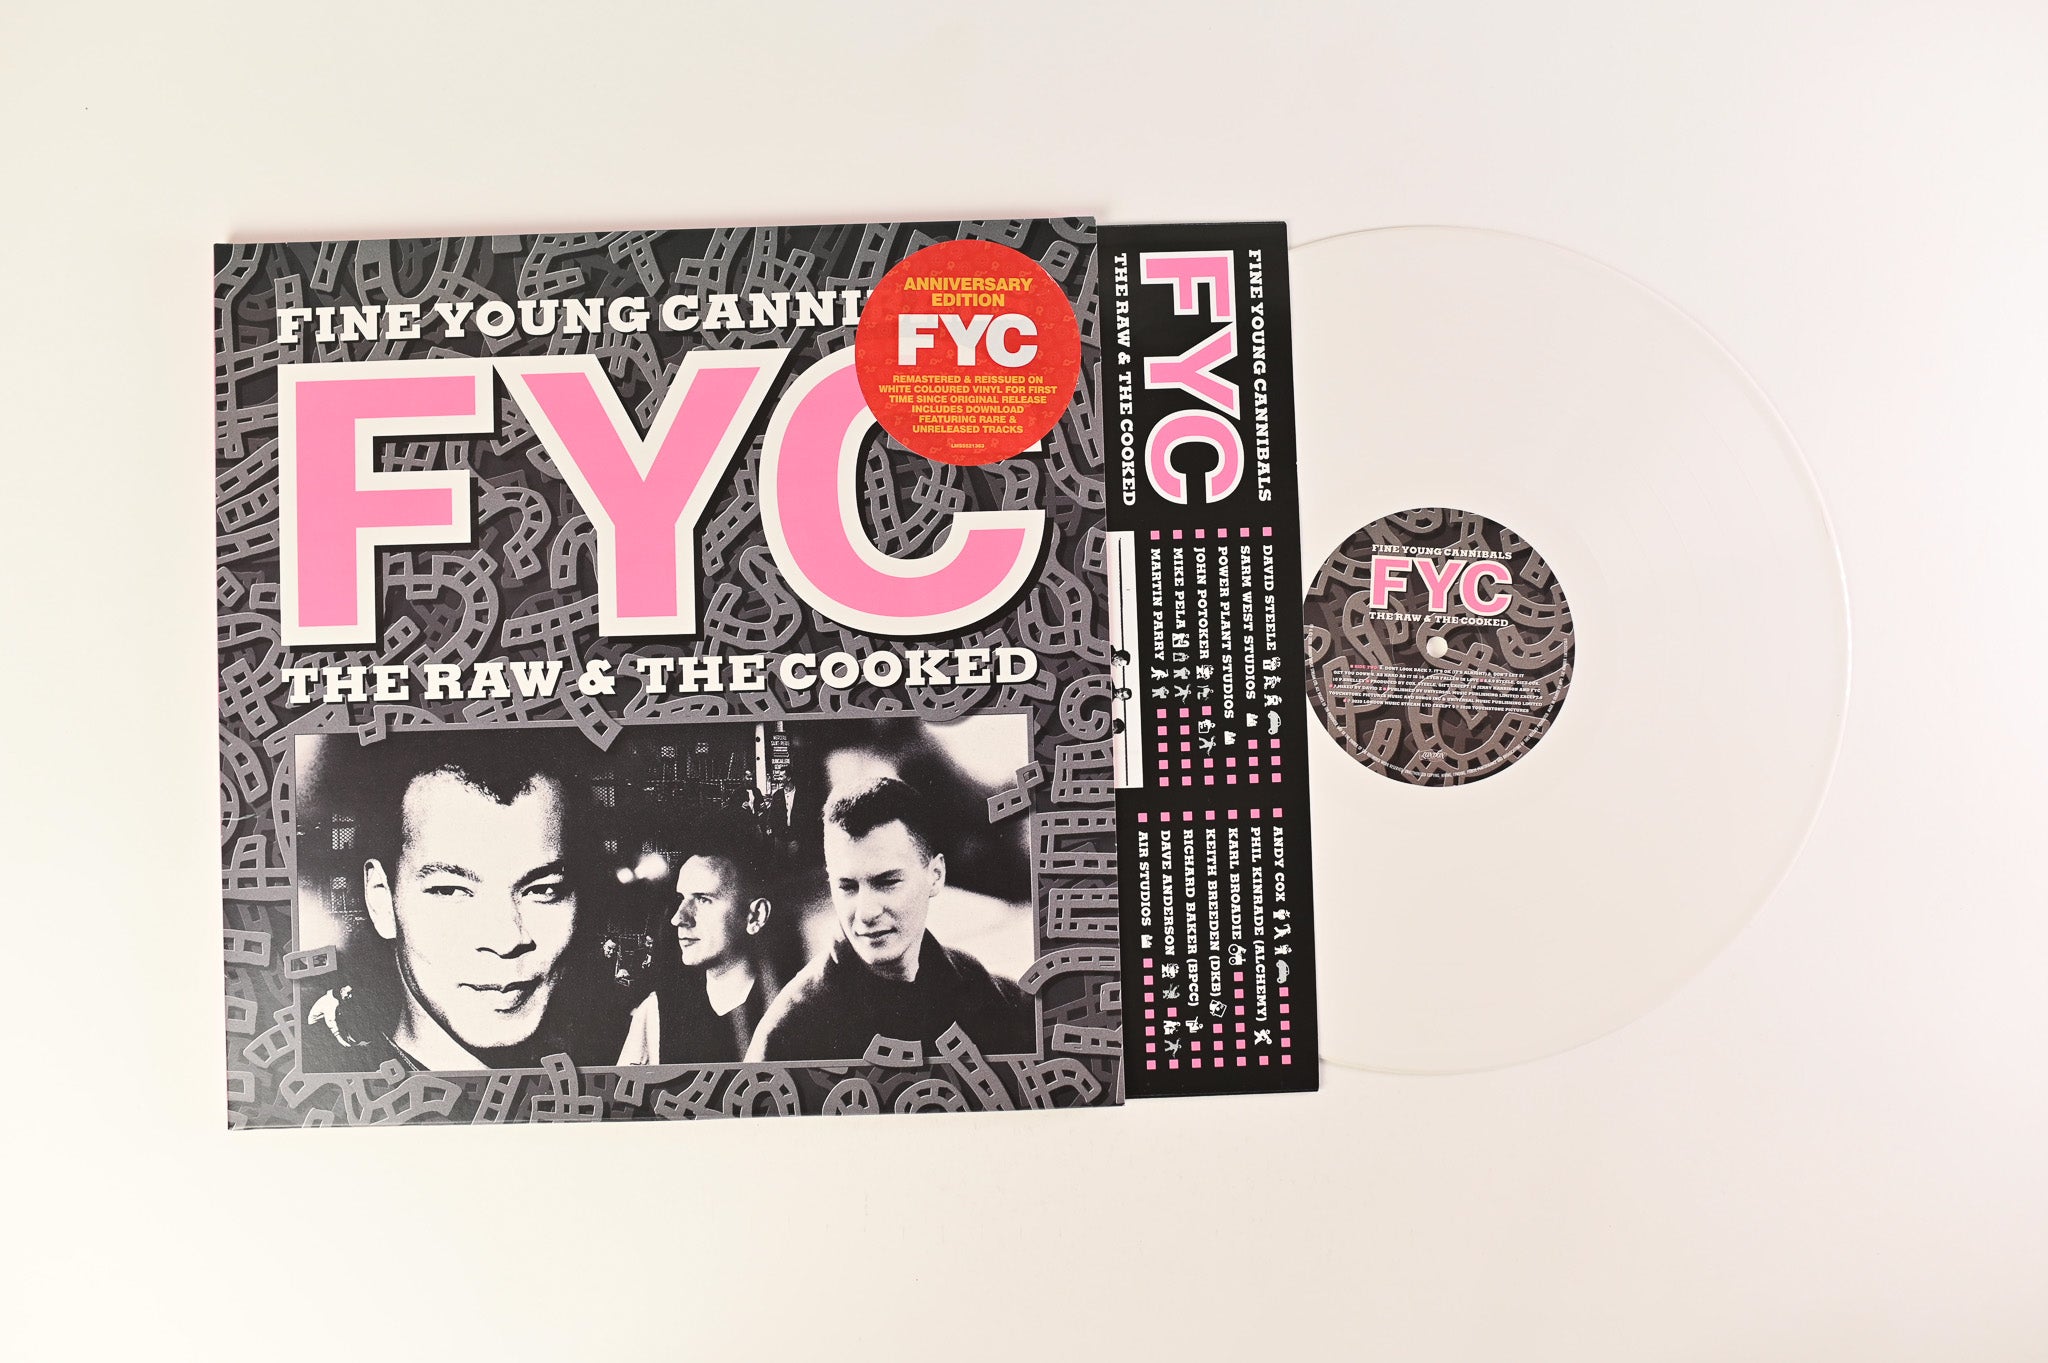 Fine Young Cannibals - The Raw & The Cooked on London White Reissue